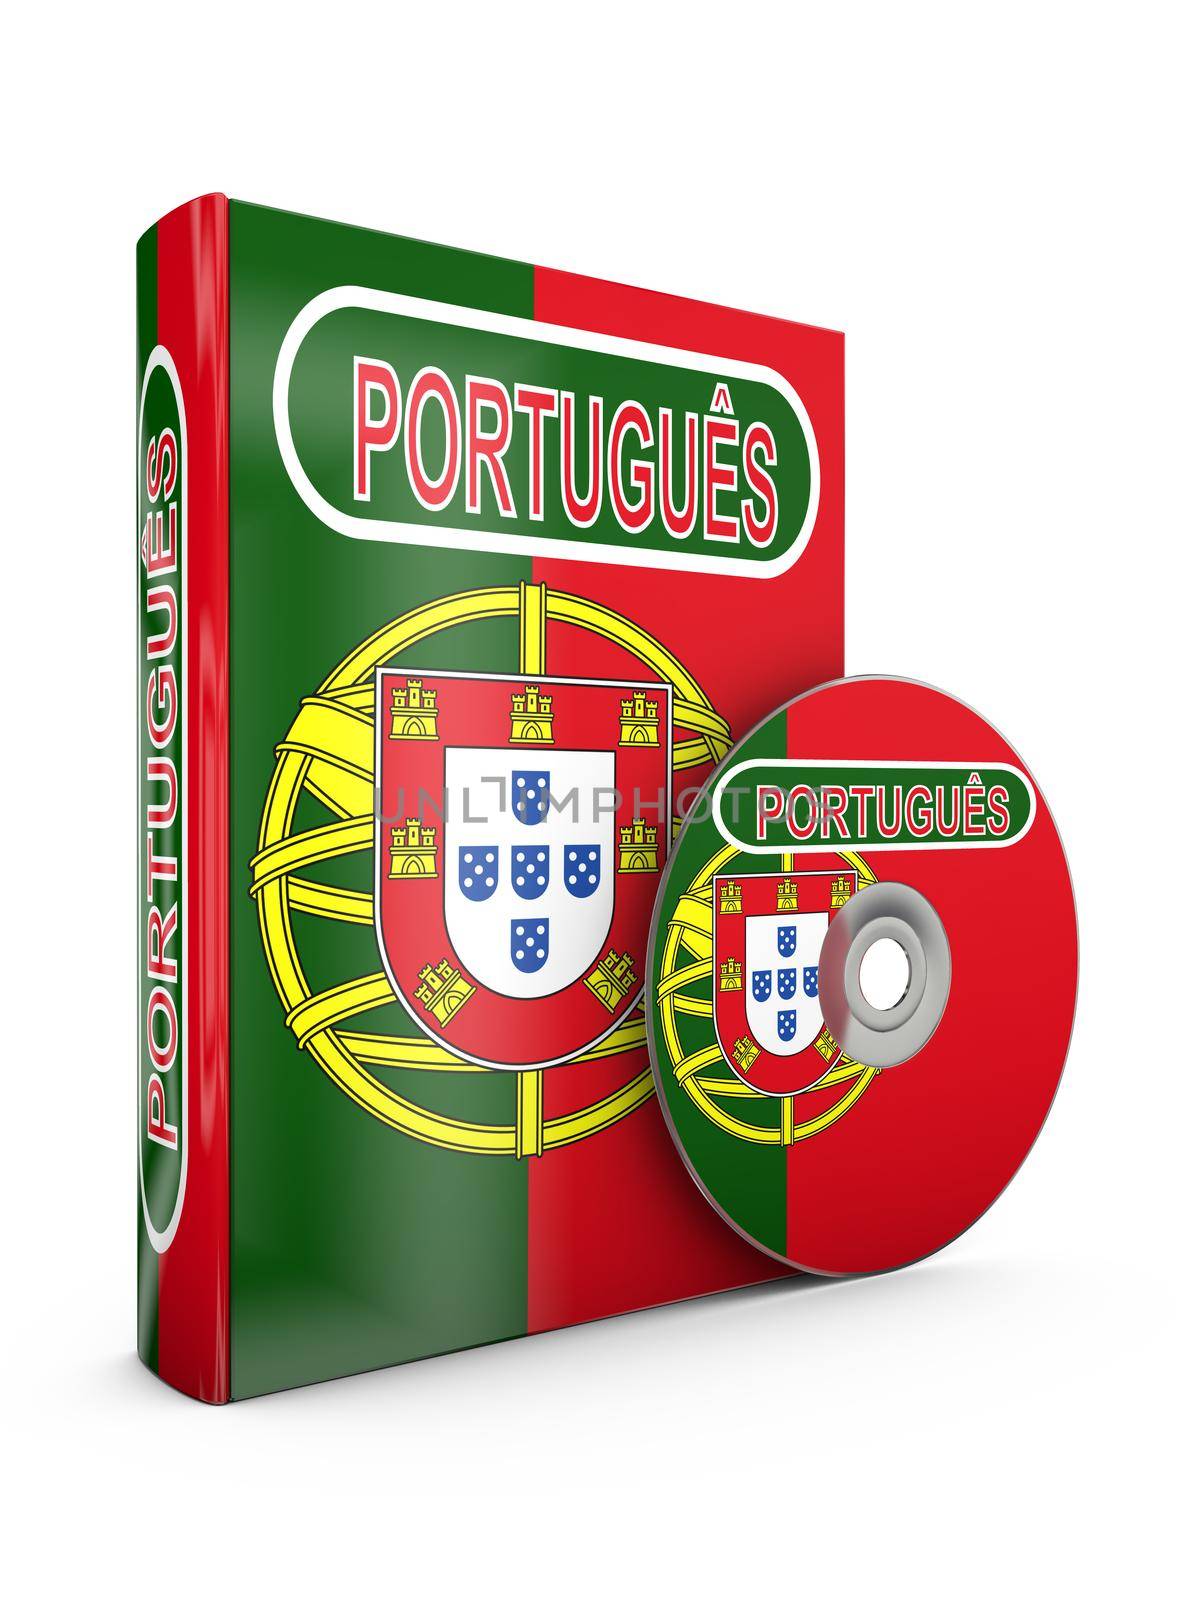 book and a CD with the image of the flag of Portugal and the inscription - Portuguese